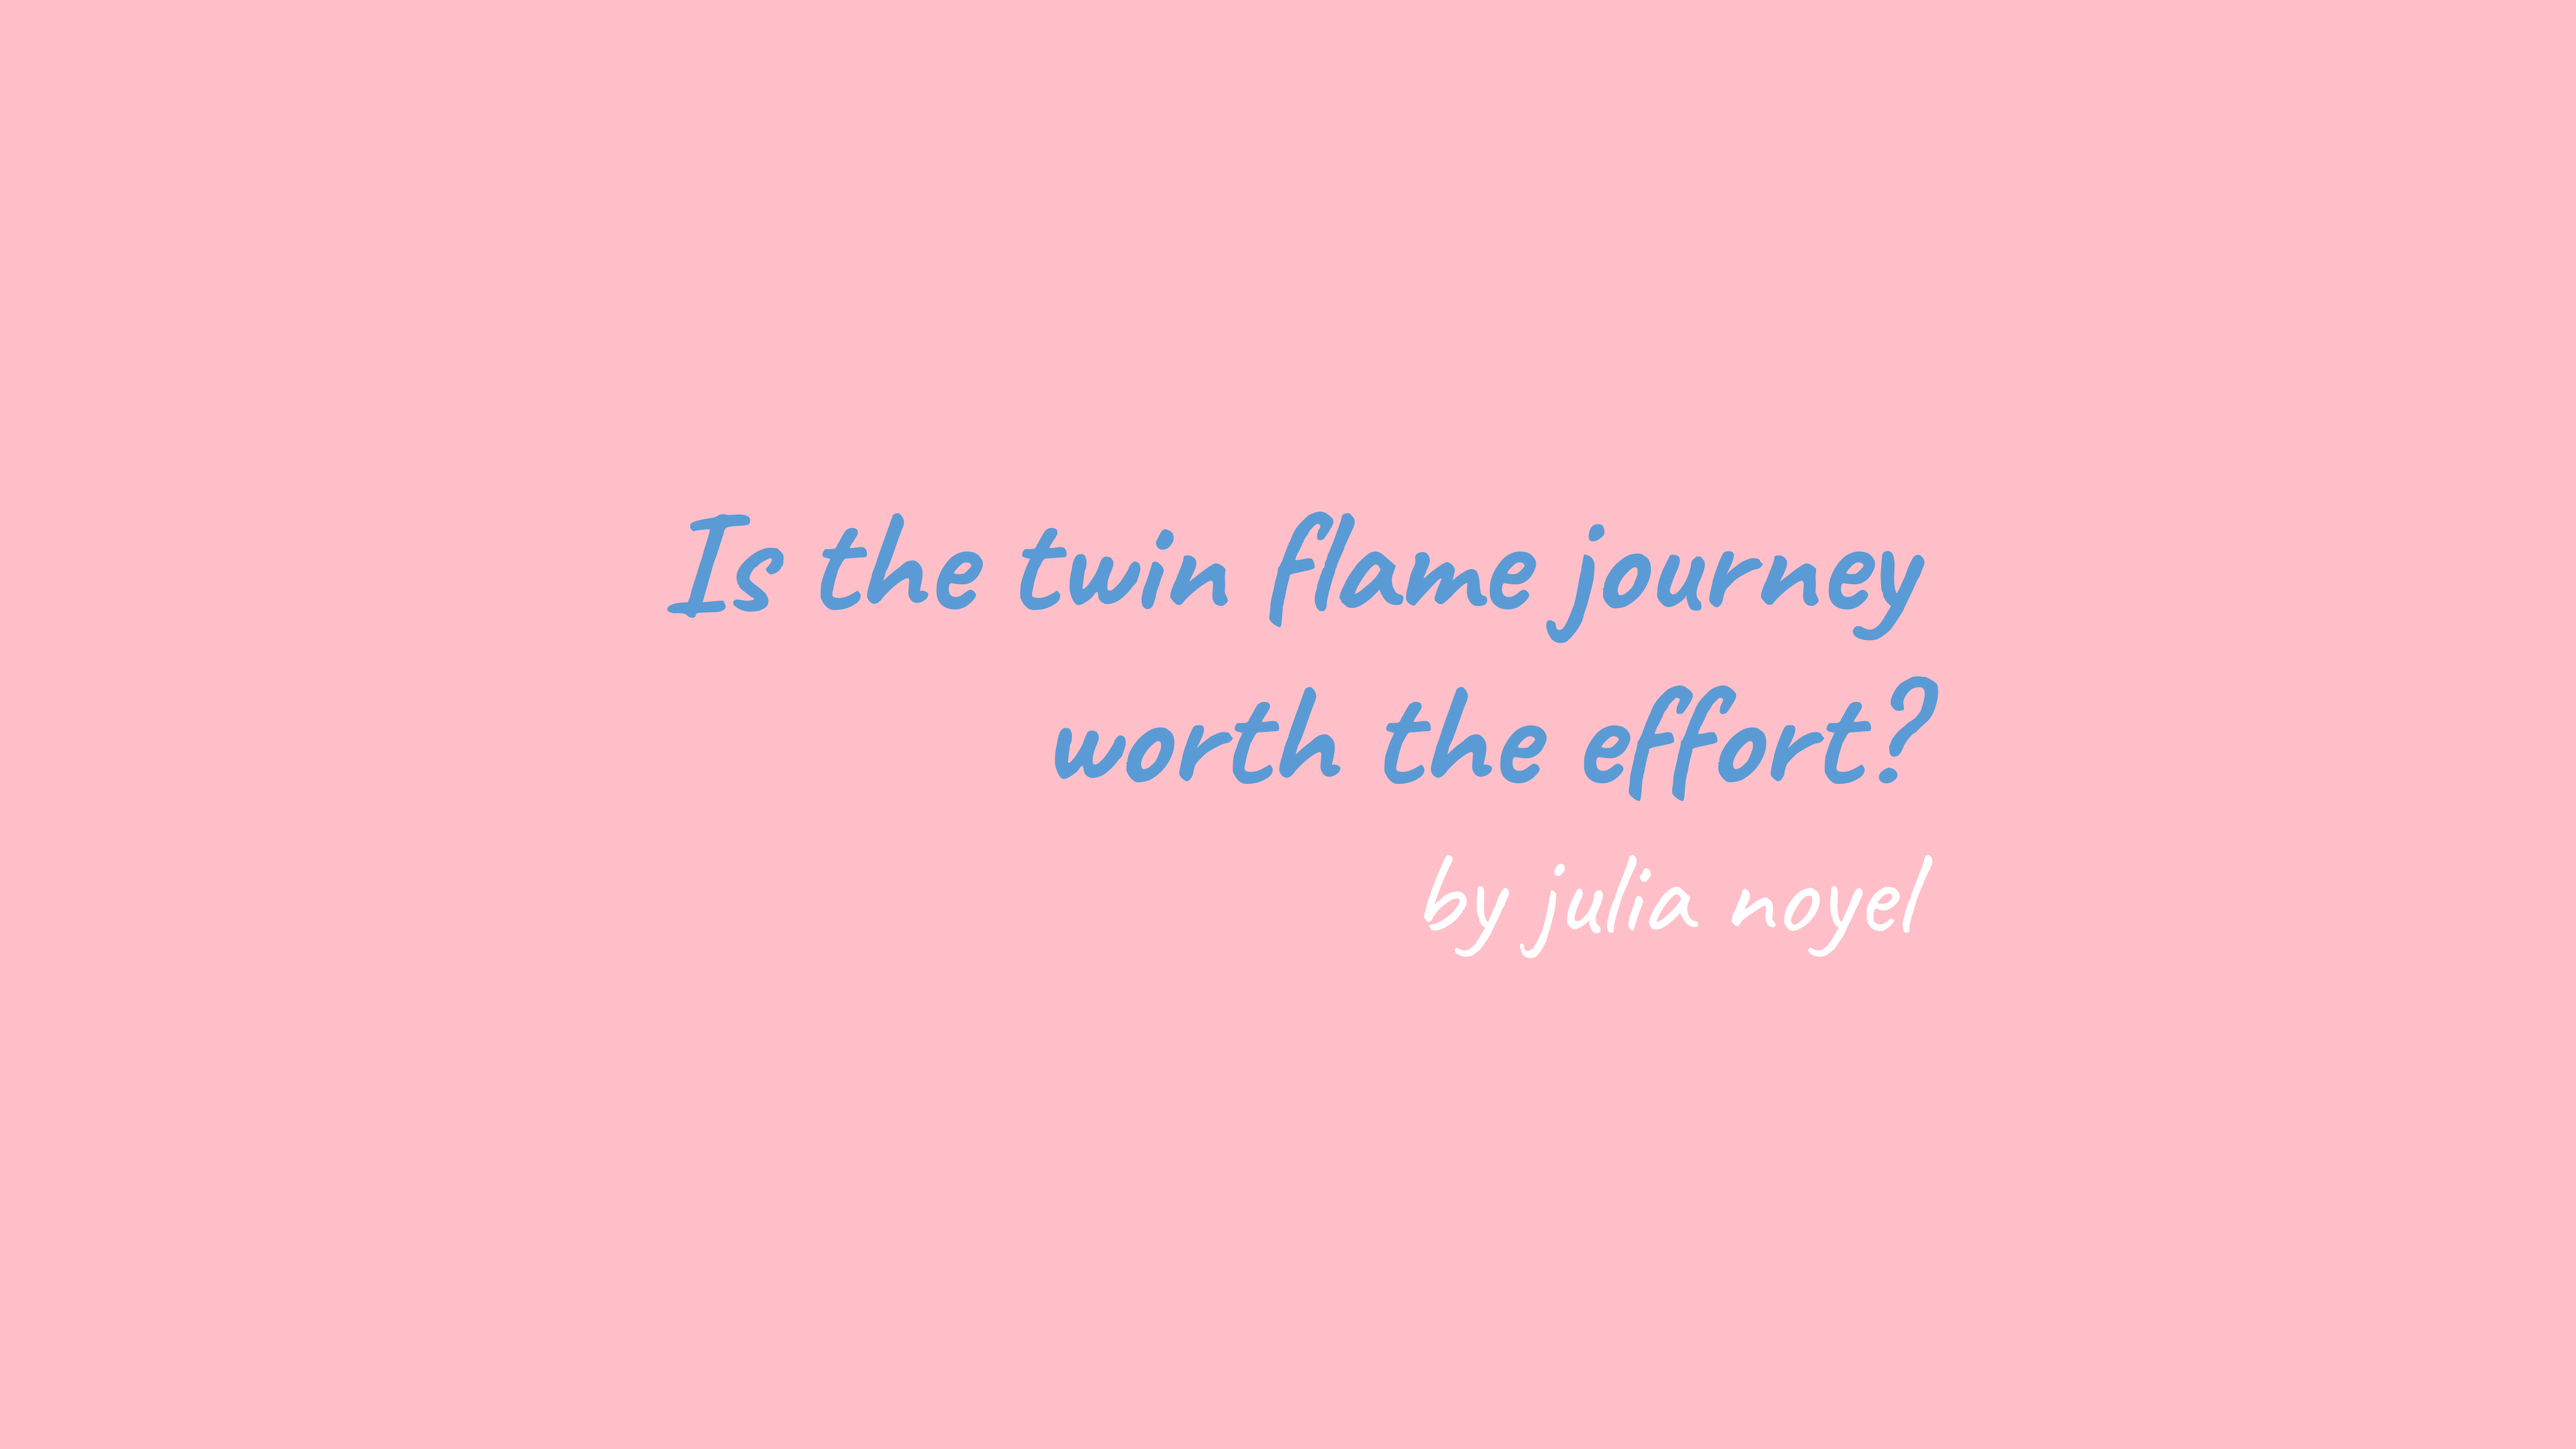 Is the twin flame journey worth the effort by Julia Noyel